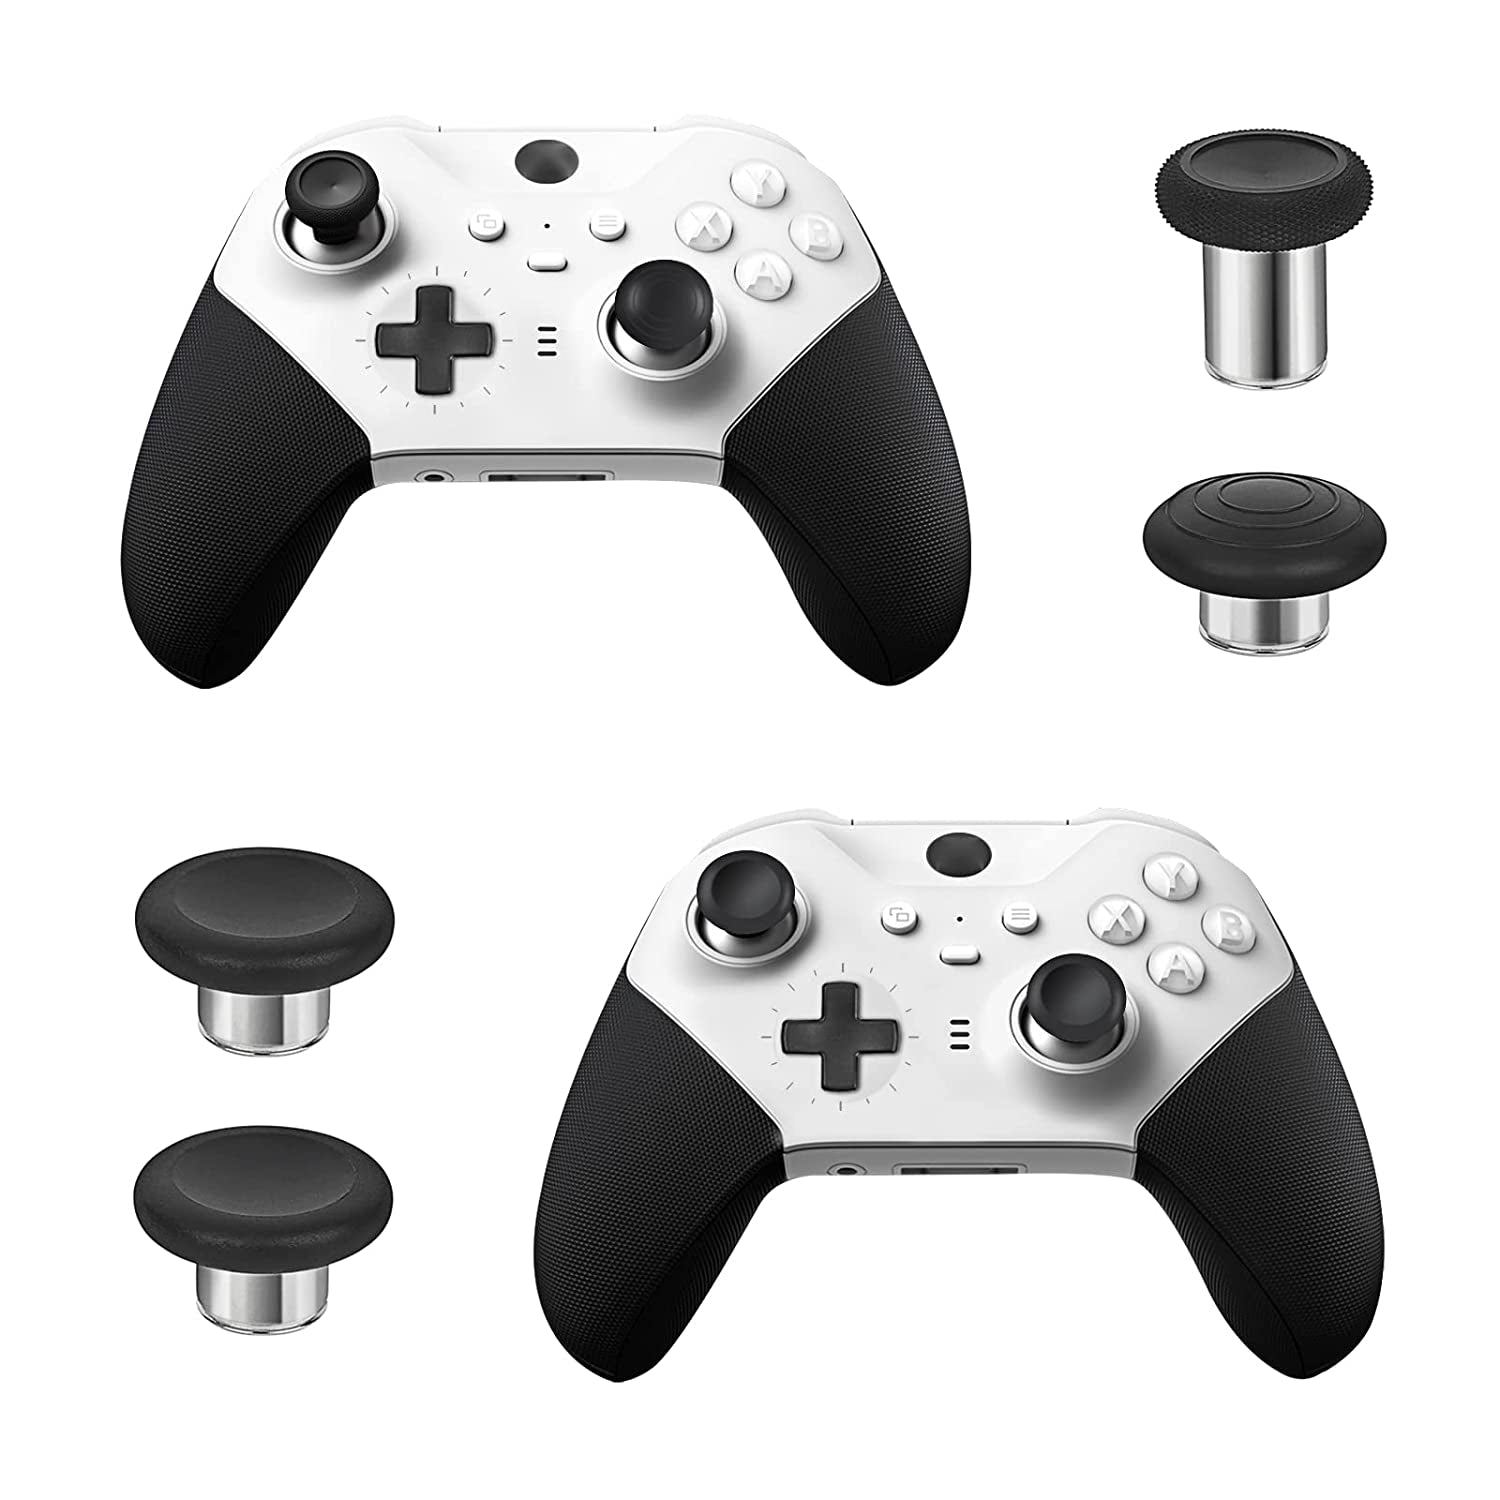 Xbox Elite Controller Series 2 Core Metal Replacement Thumbsticks and Component Pack - Includes 4 Swap Magnetic Joysticks, 4 Paddles, 1 Standard D-Pad, and Accessory Parts - Compatible with Xbox One Elite 2 (Black)